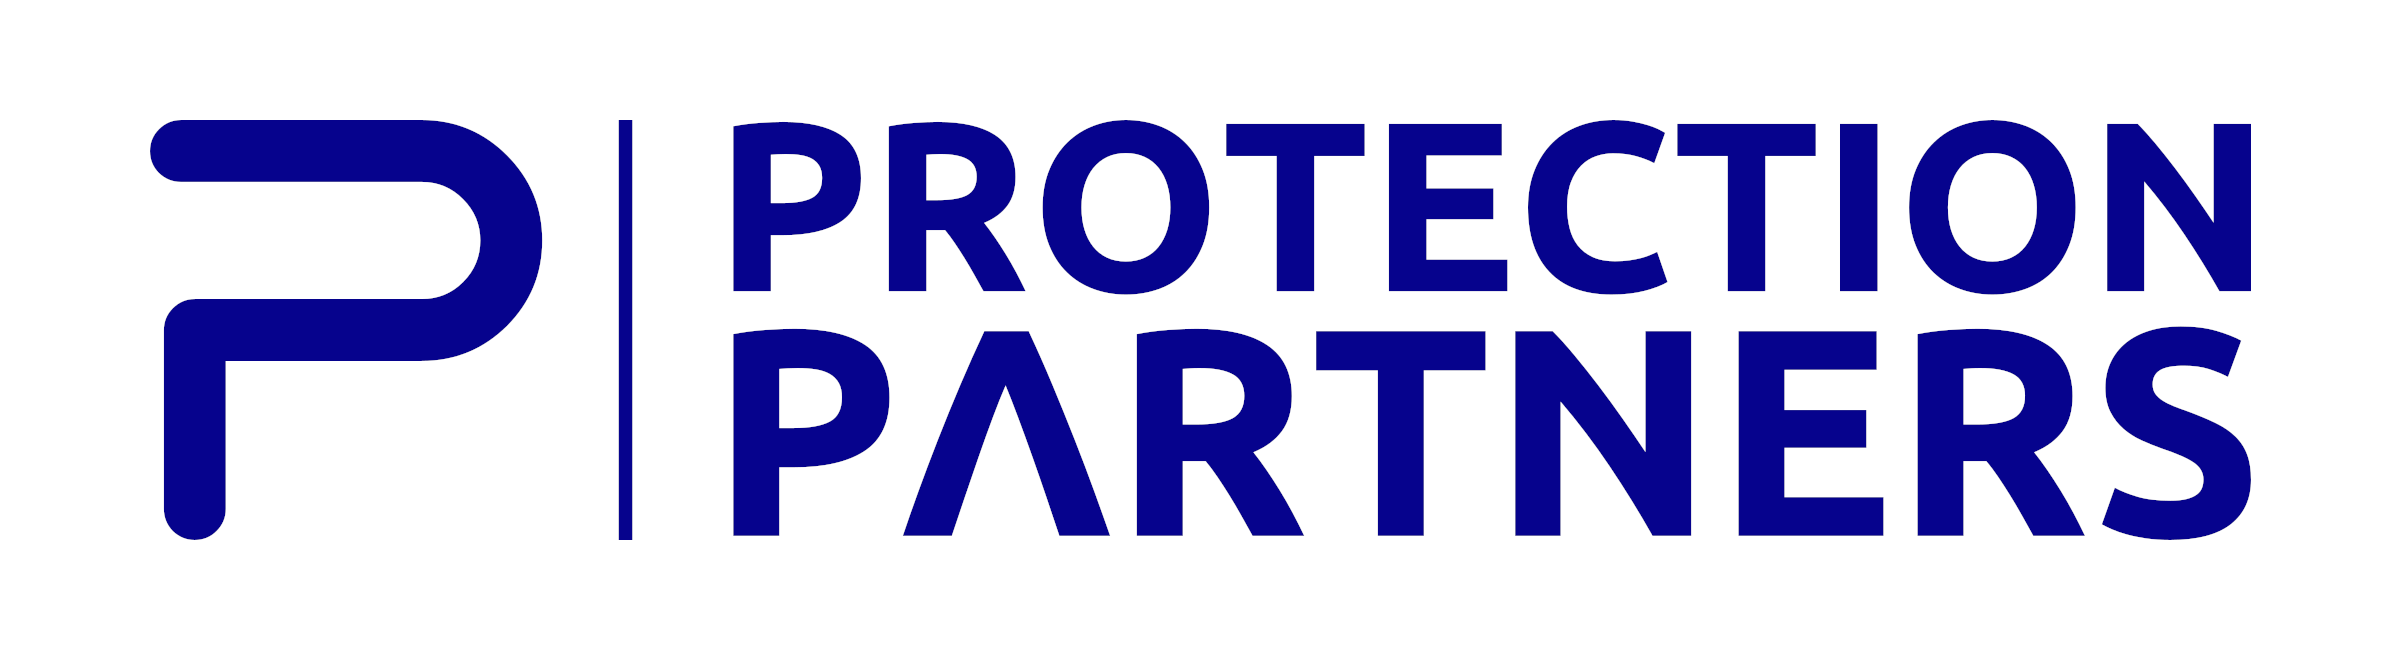 Protection Partners logo